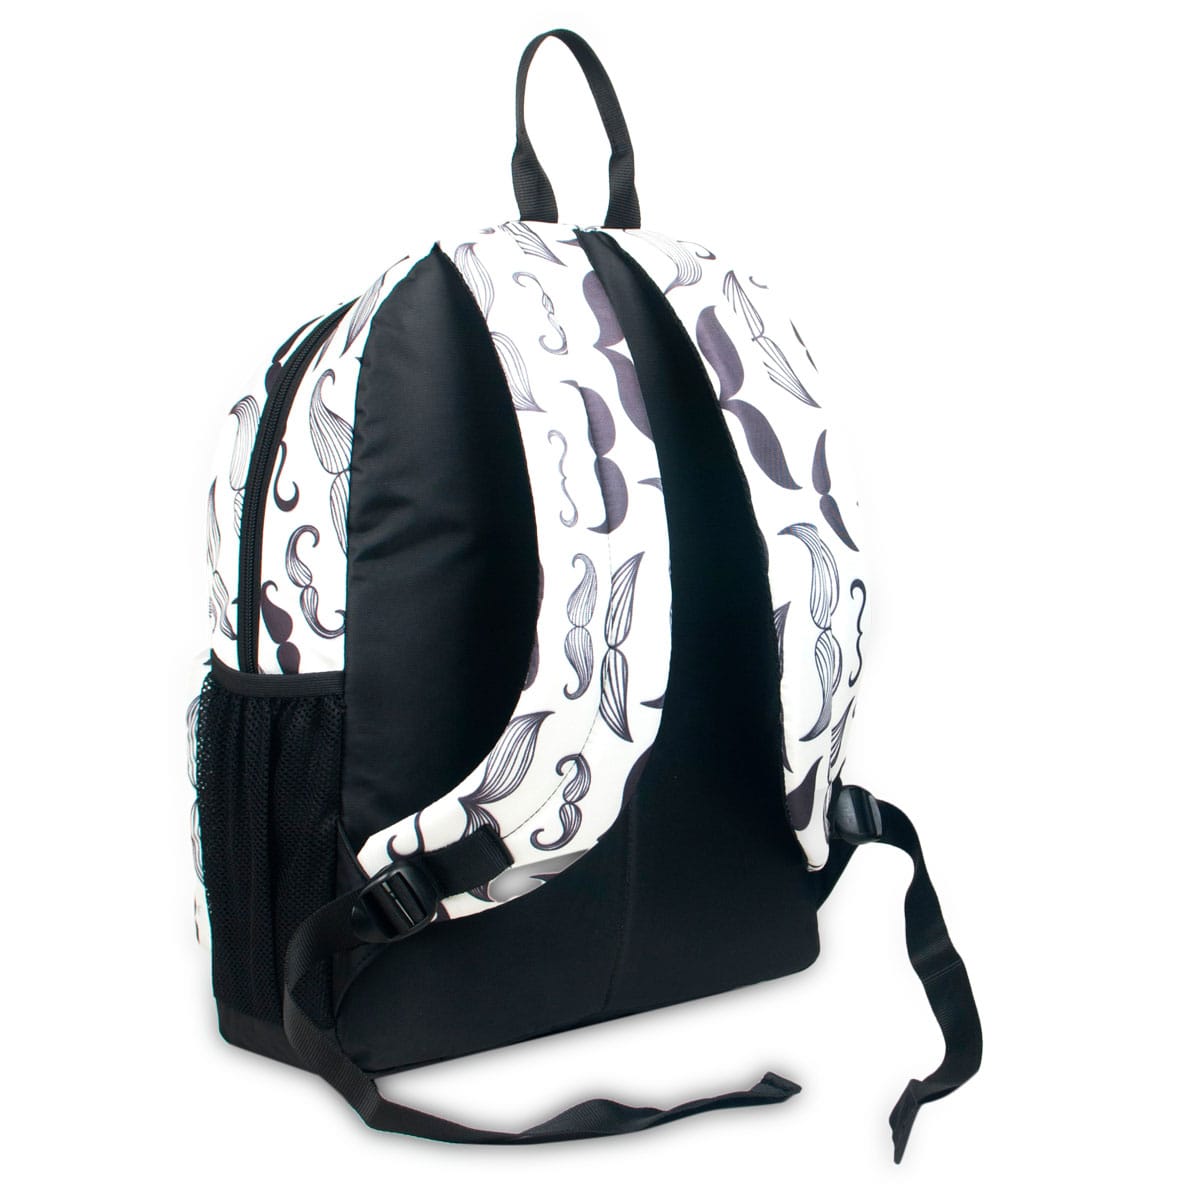 Too Mooch, Protecta Mystere Casual Backpack-4